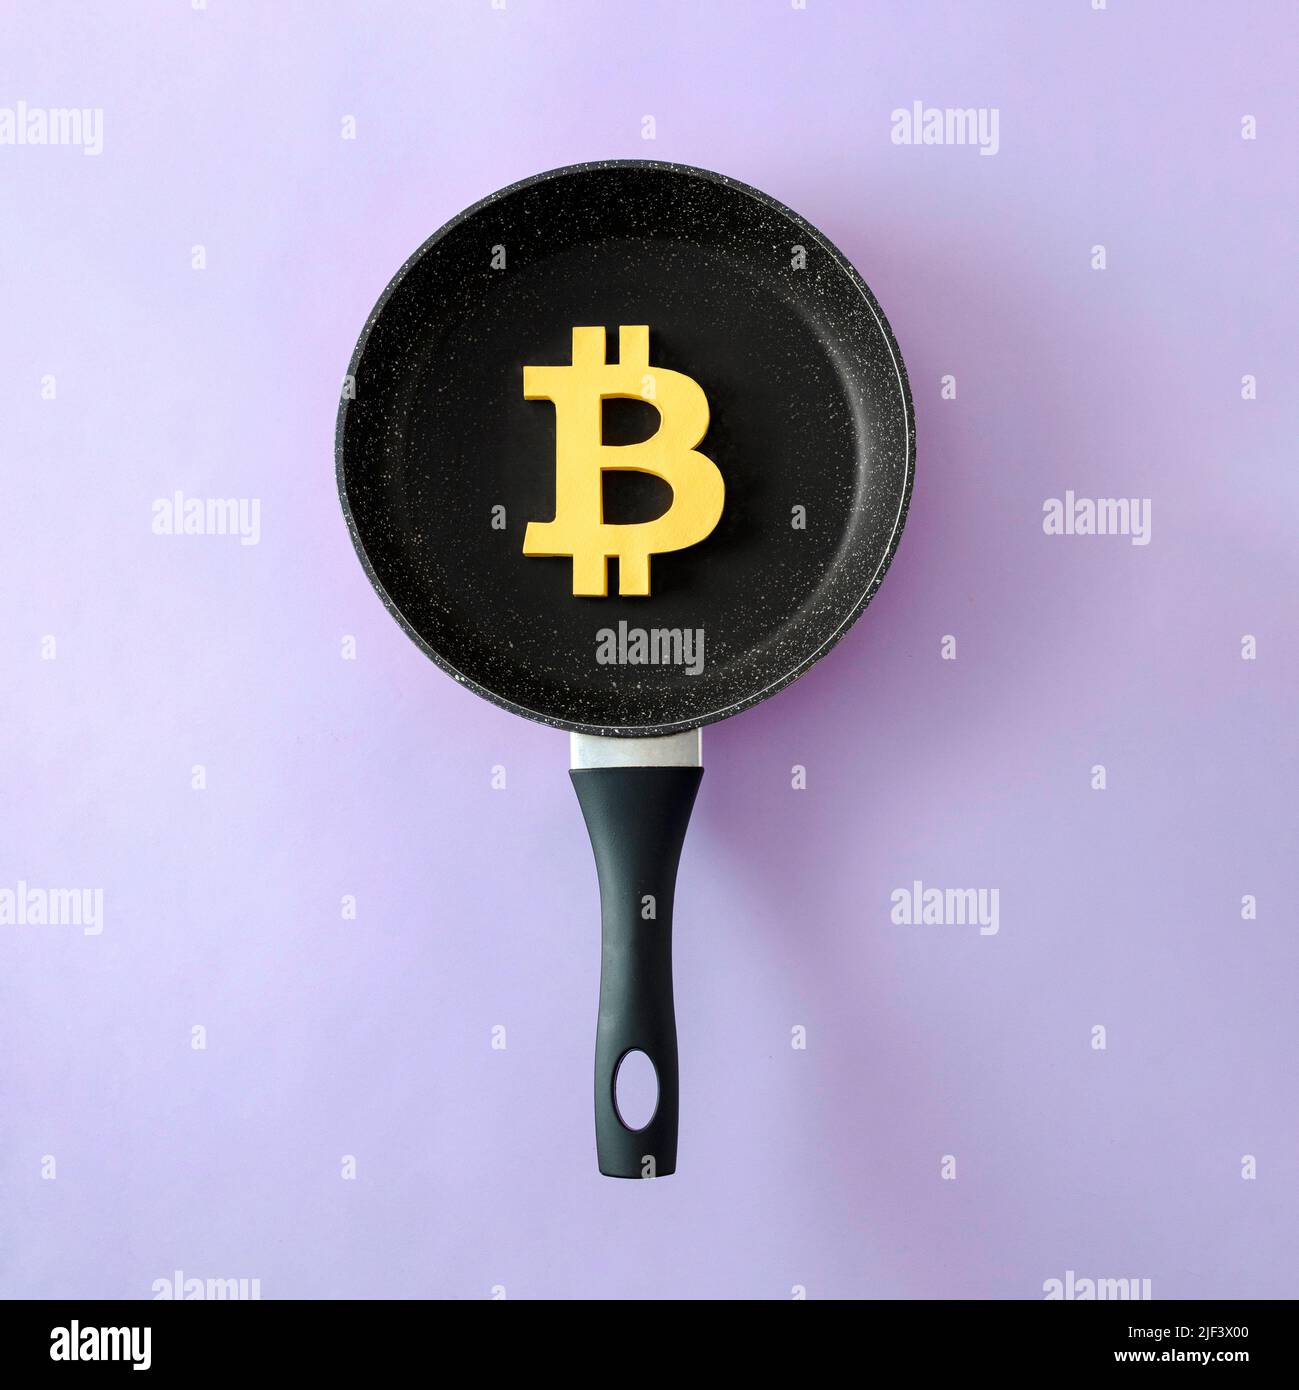 The symbol of the modern digital cryptocurrency Bitcoin in a frying pan as a concept of risk, recession and other financial problems. Stock Photo